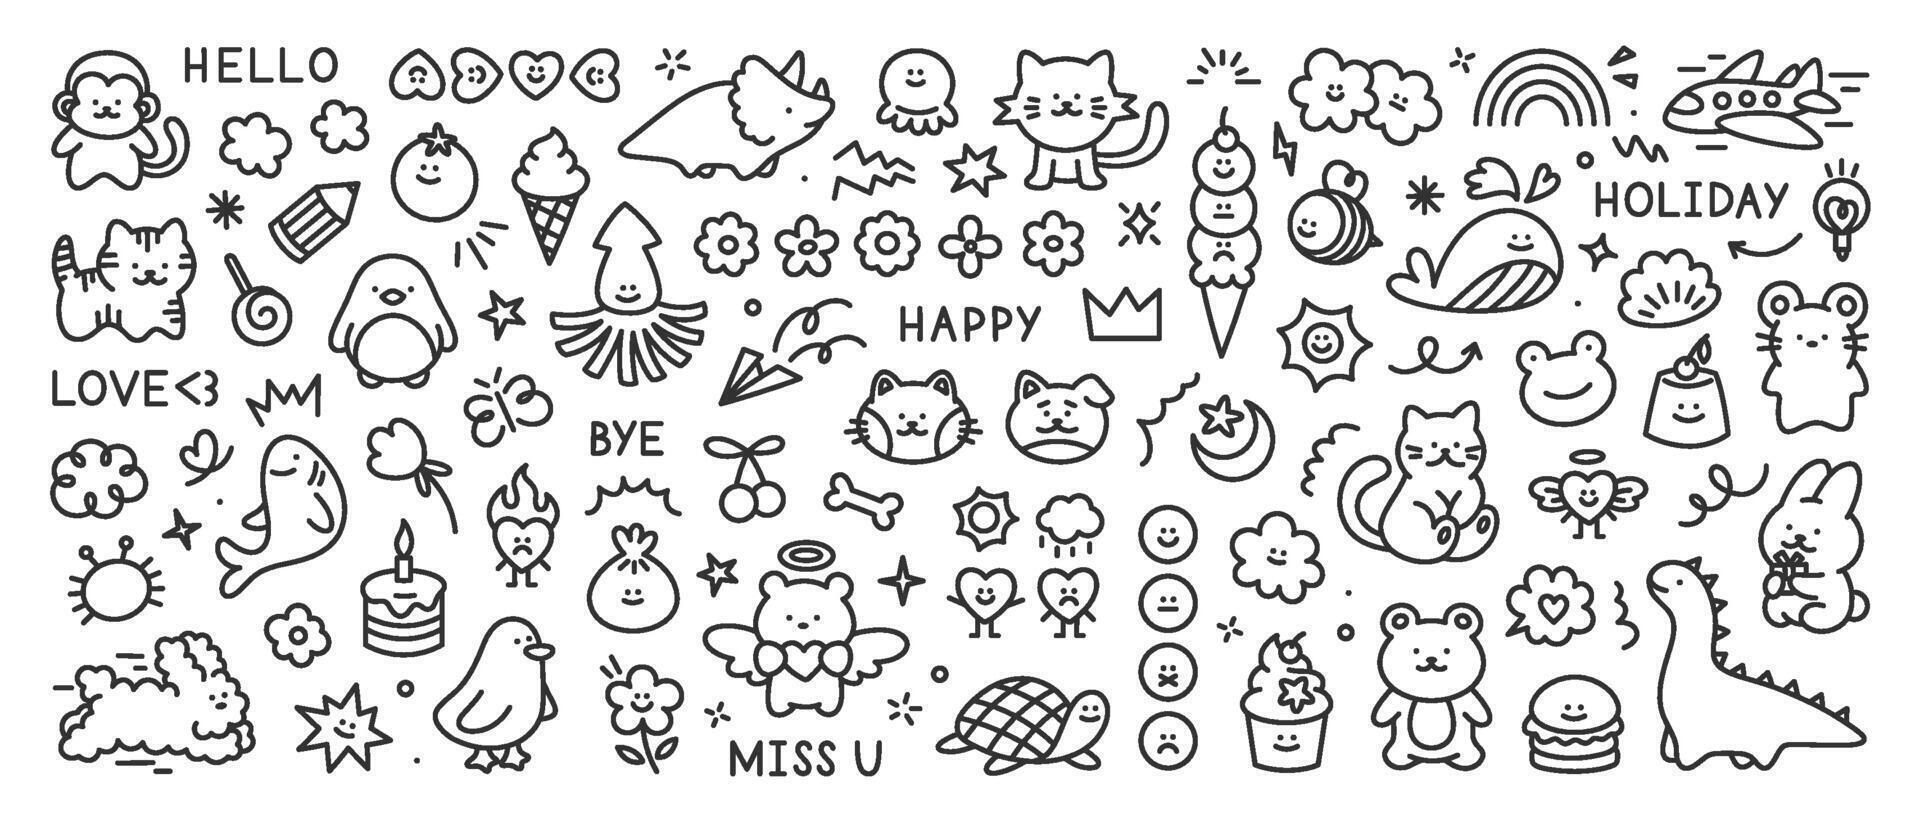 Scribble kid doodle icons set. Cute hand drawn set of cat, sun, flower, smile, heart, animal, cloud, star, rainbow, candy, dog. trendy sketch childish elements for stickers, patterns, banners vector